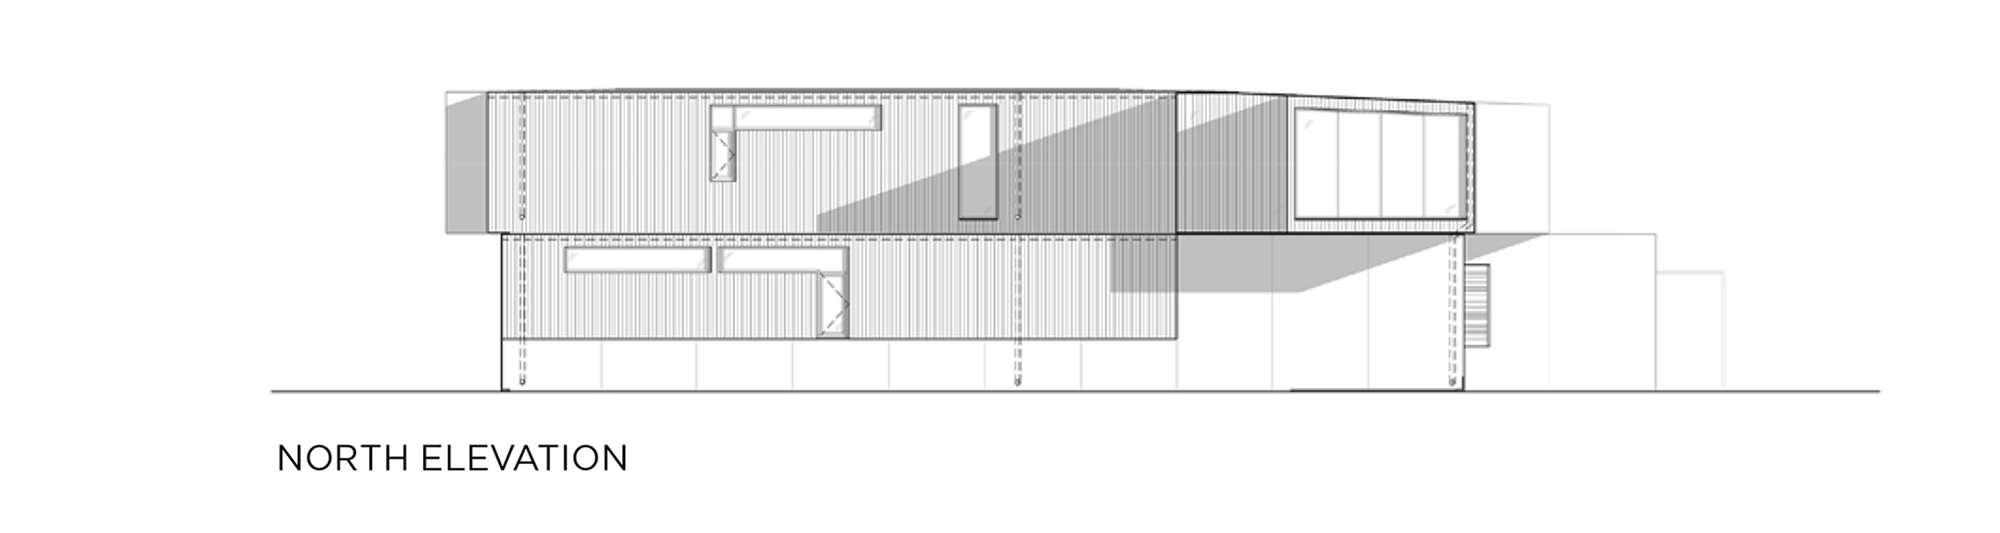 baulinder-haus-hufft-projects_north_elevation